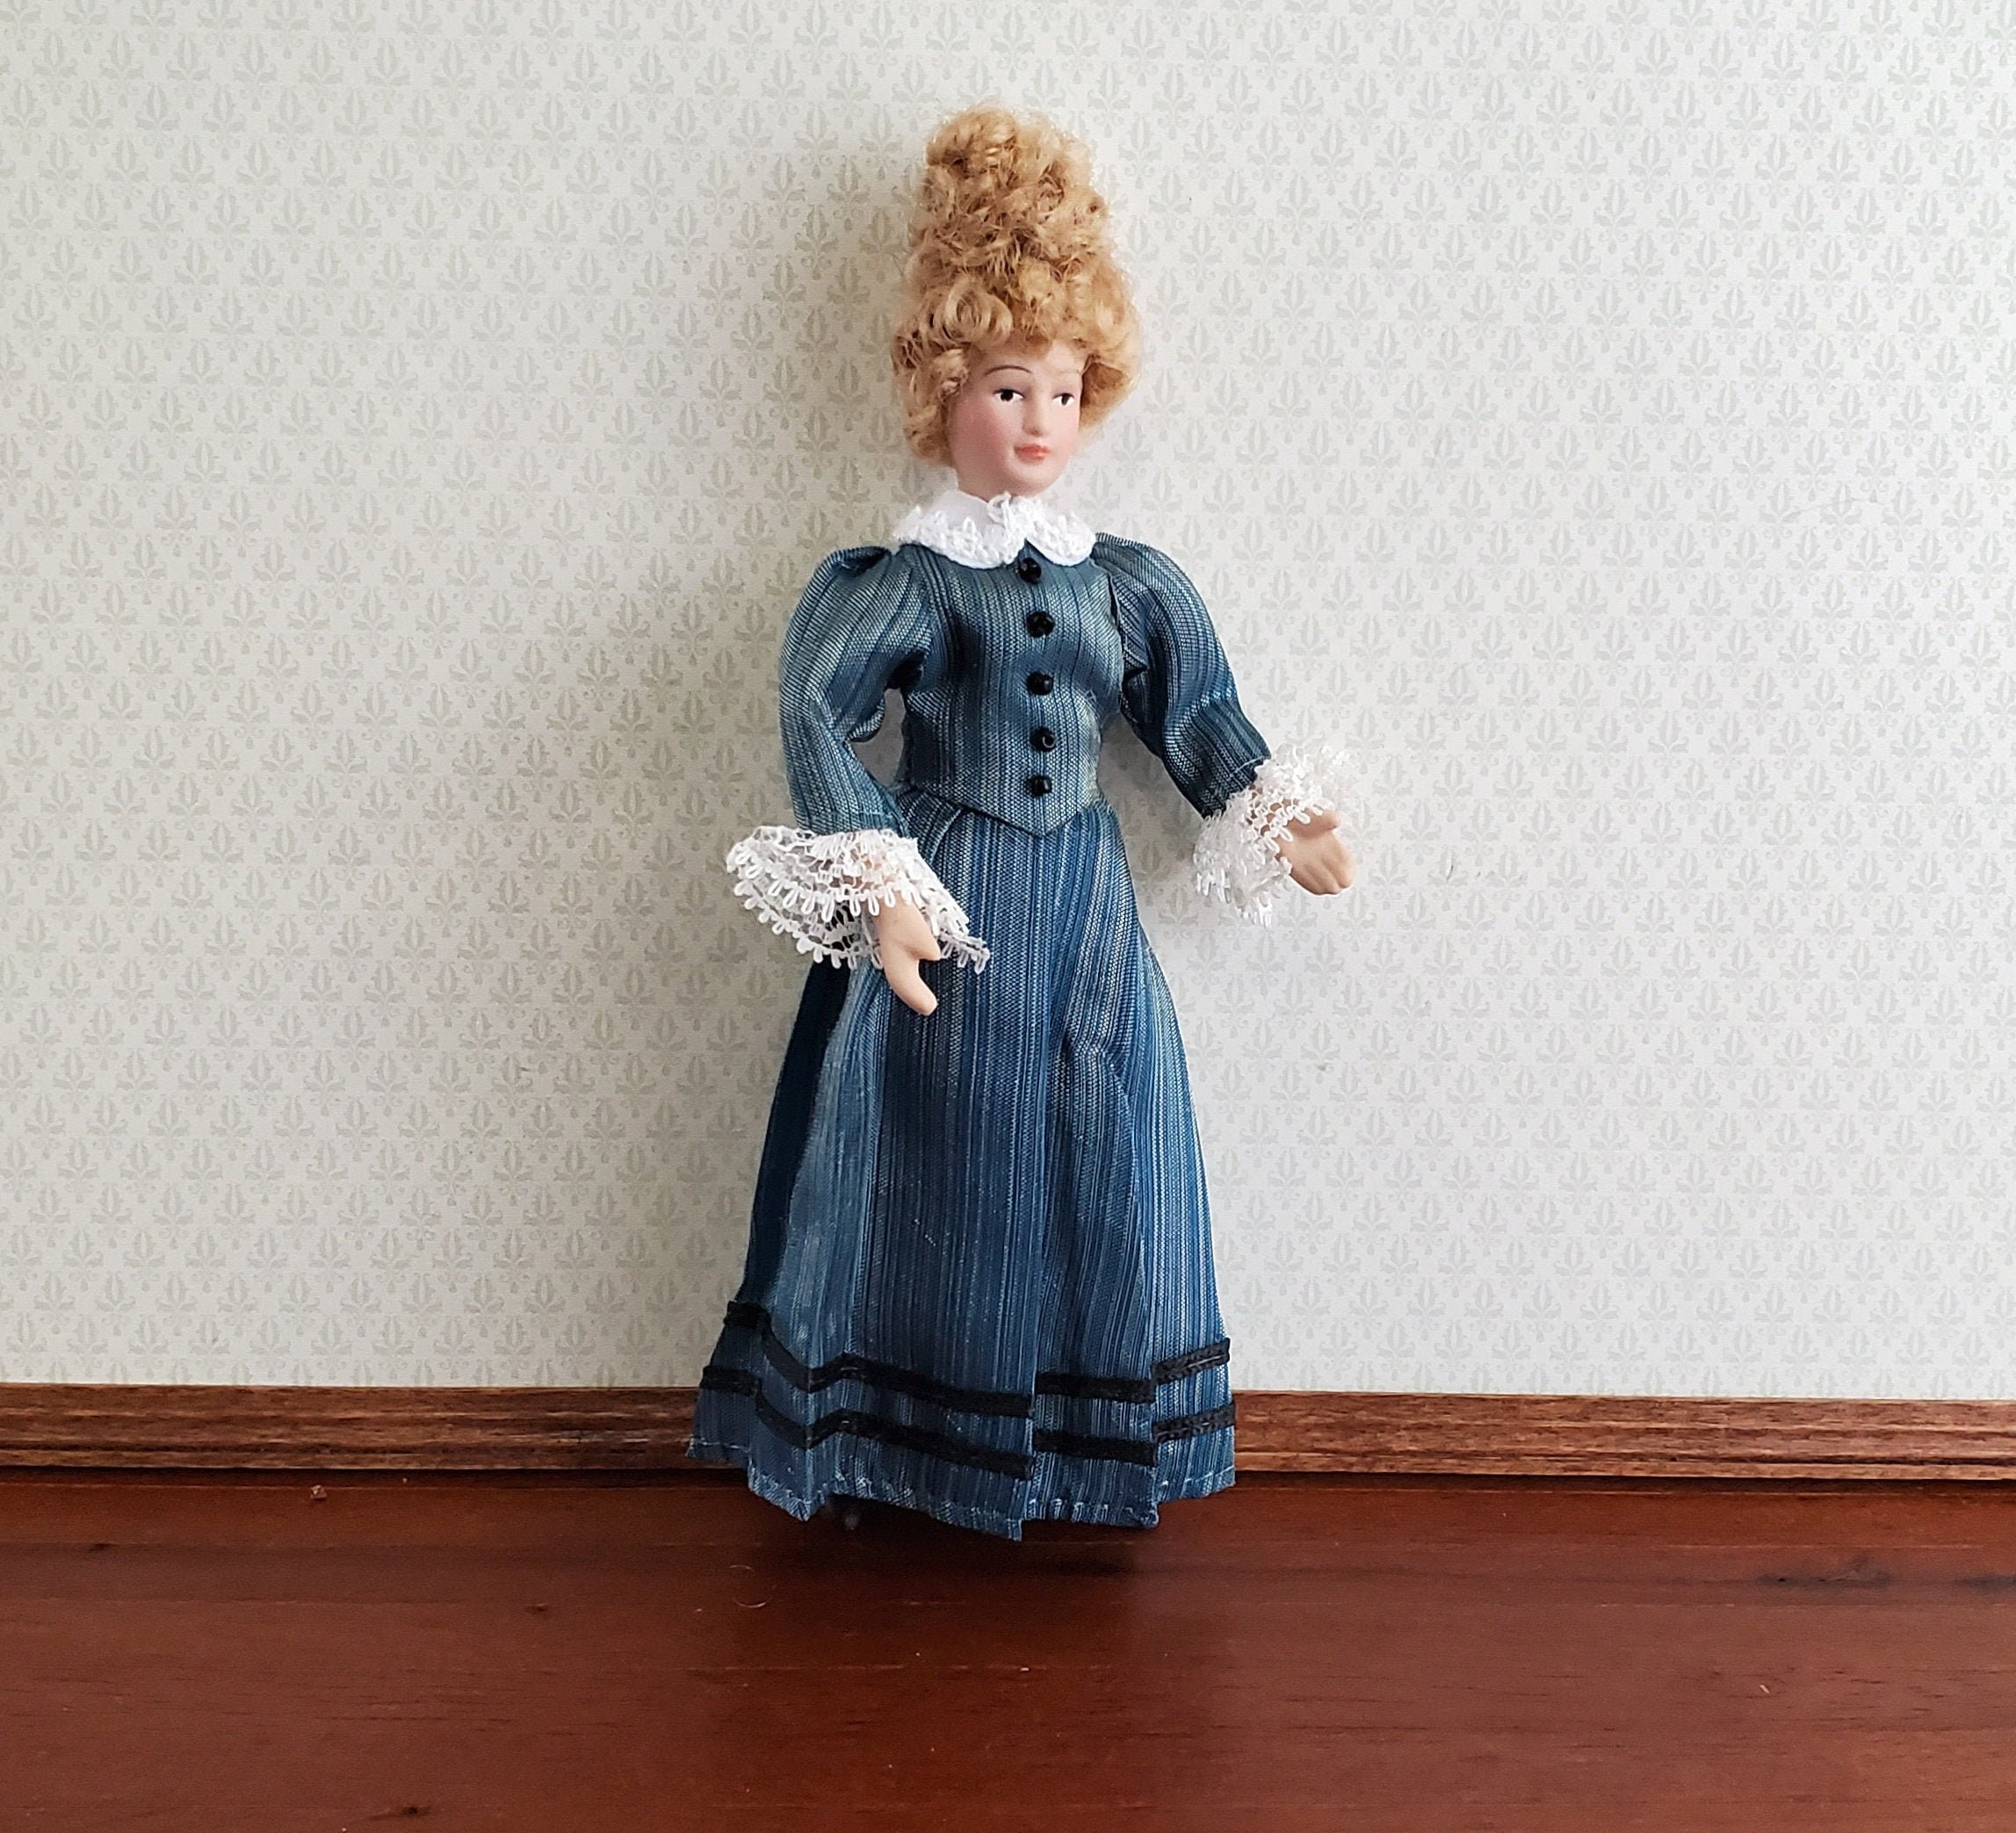 1/12 Porcelain Baby Doll In Lace Dress Dolls House Mini People Figures 